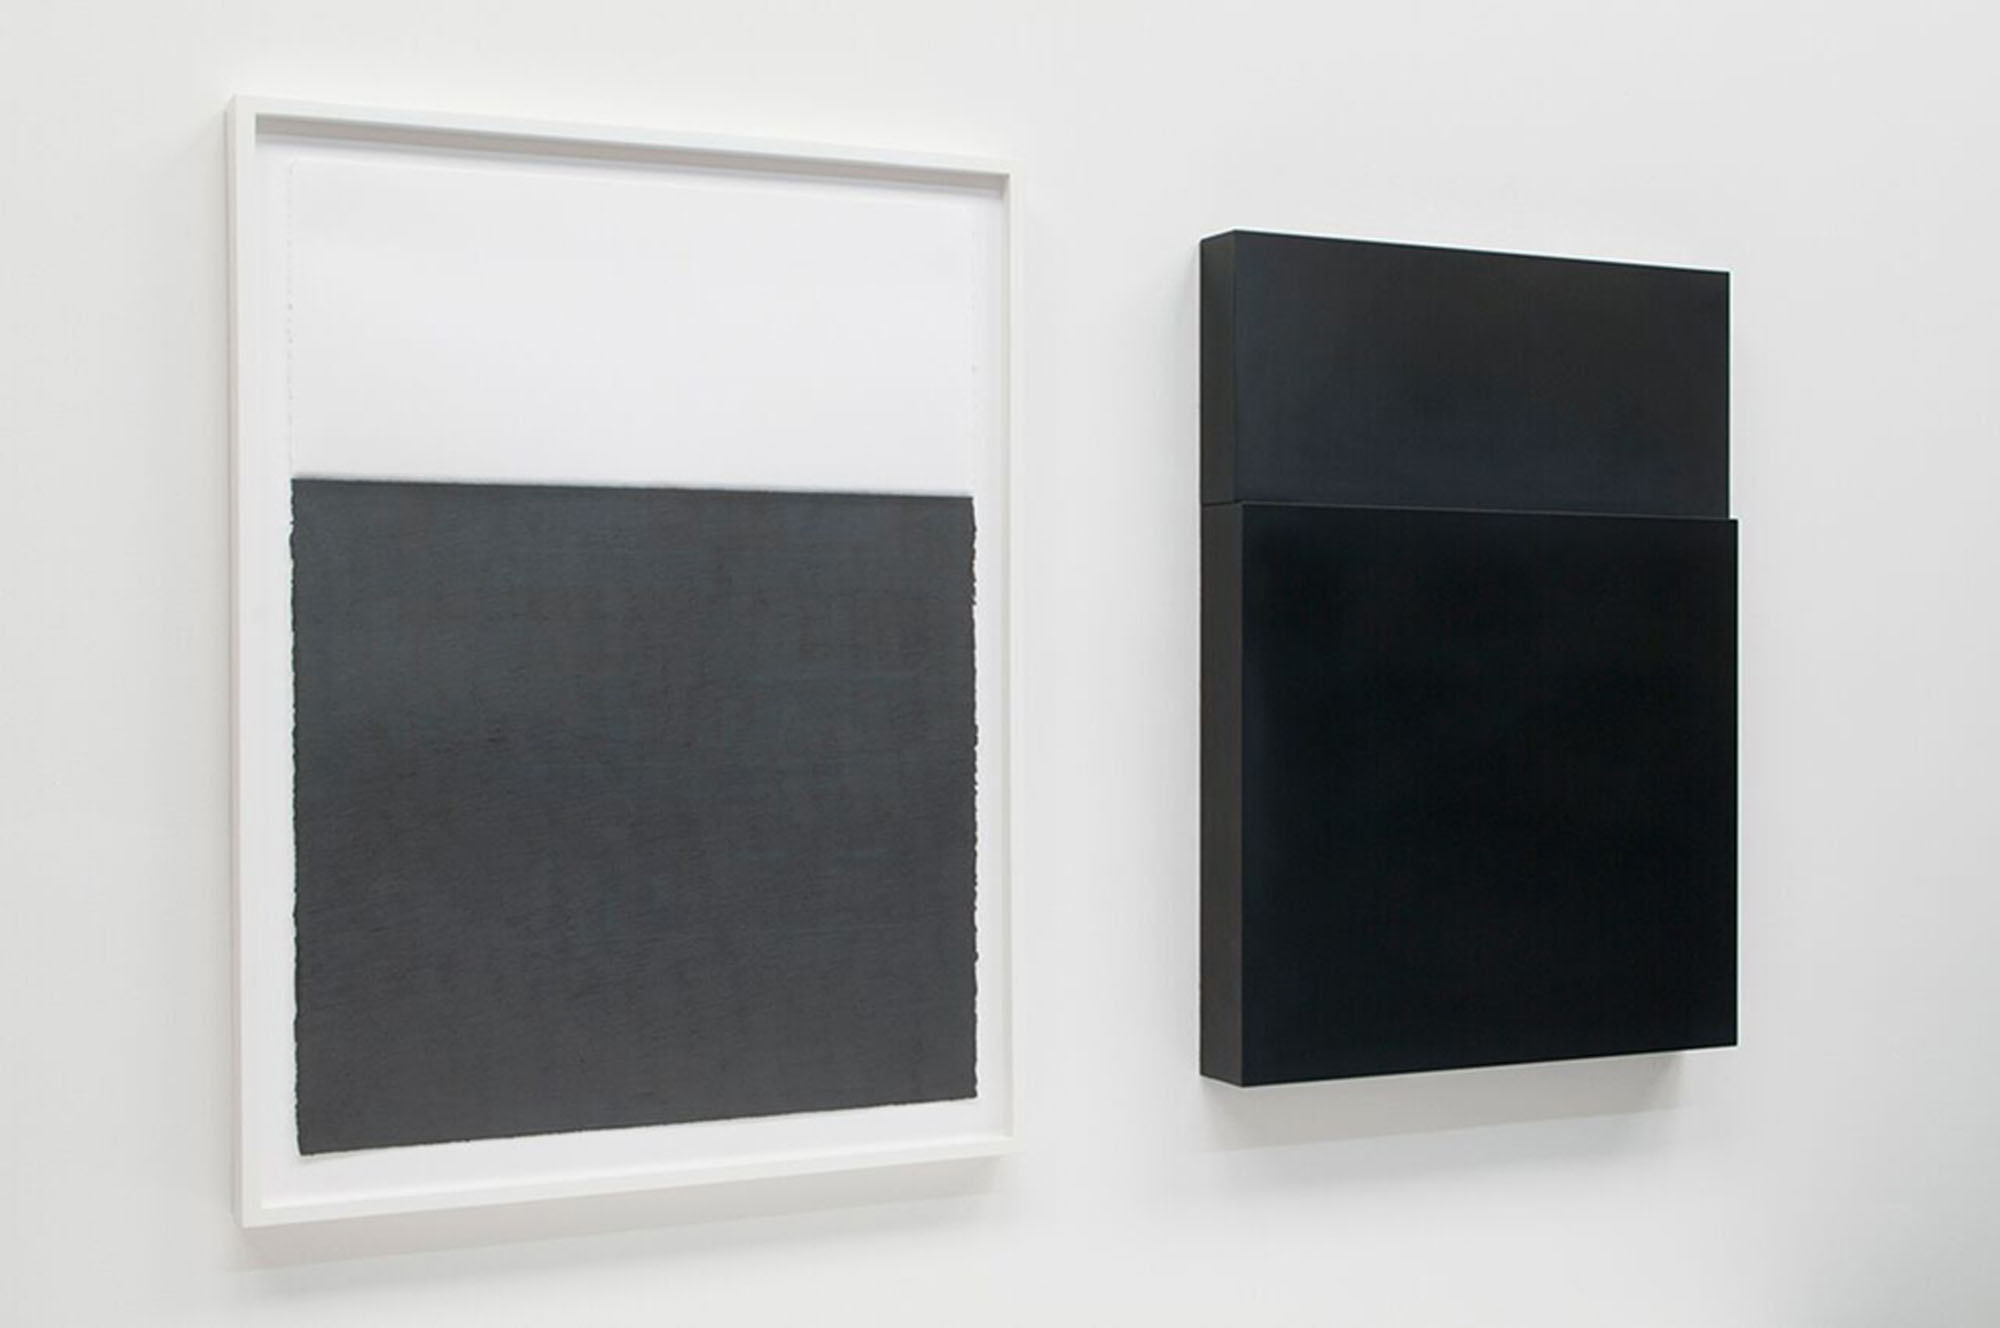   Diptych, no. 1, 2010  Drawing: Graphite pencil on paper,&nbsp;30” x 22”  Sculpture: Solid graphite,&nbsp;30” x 22” x 3” 